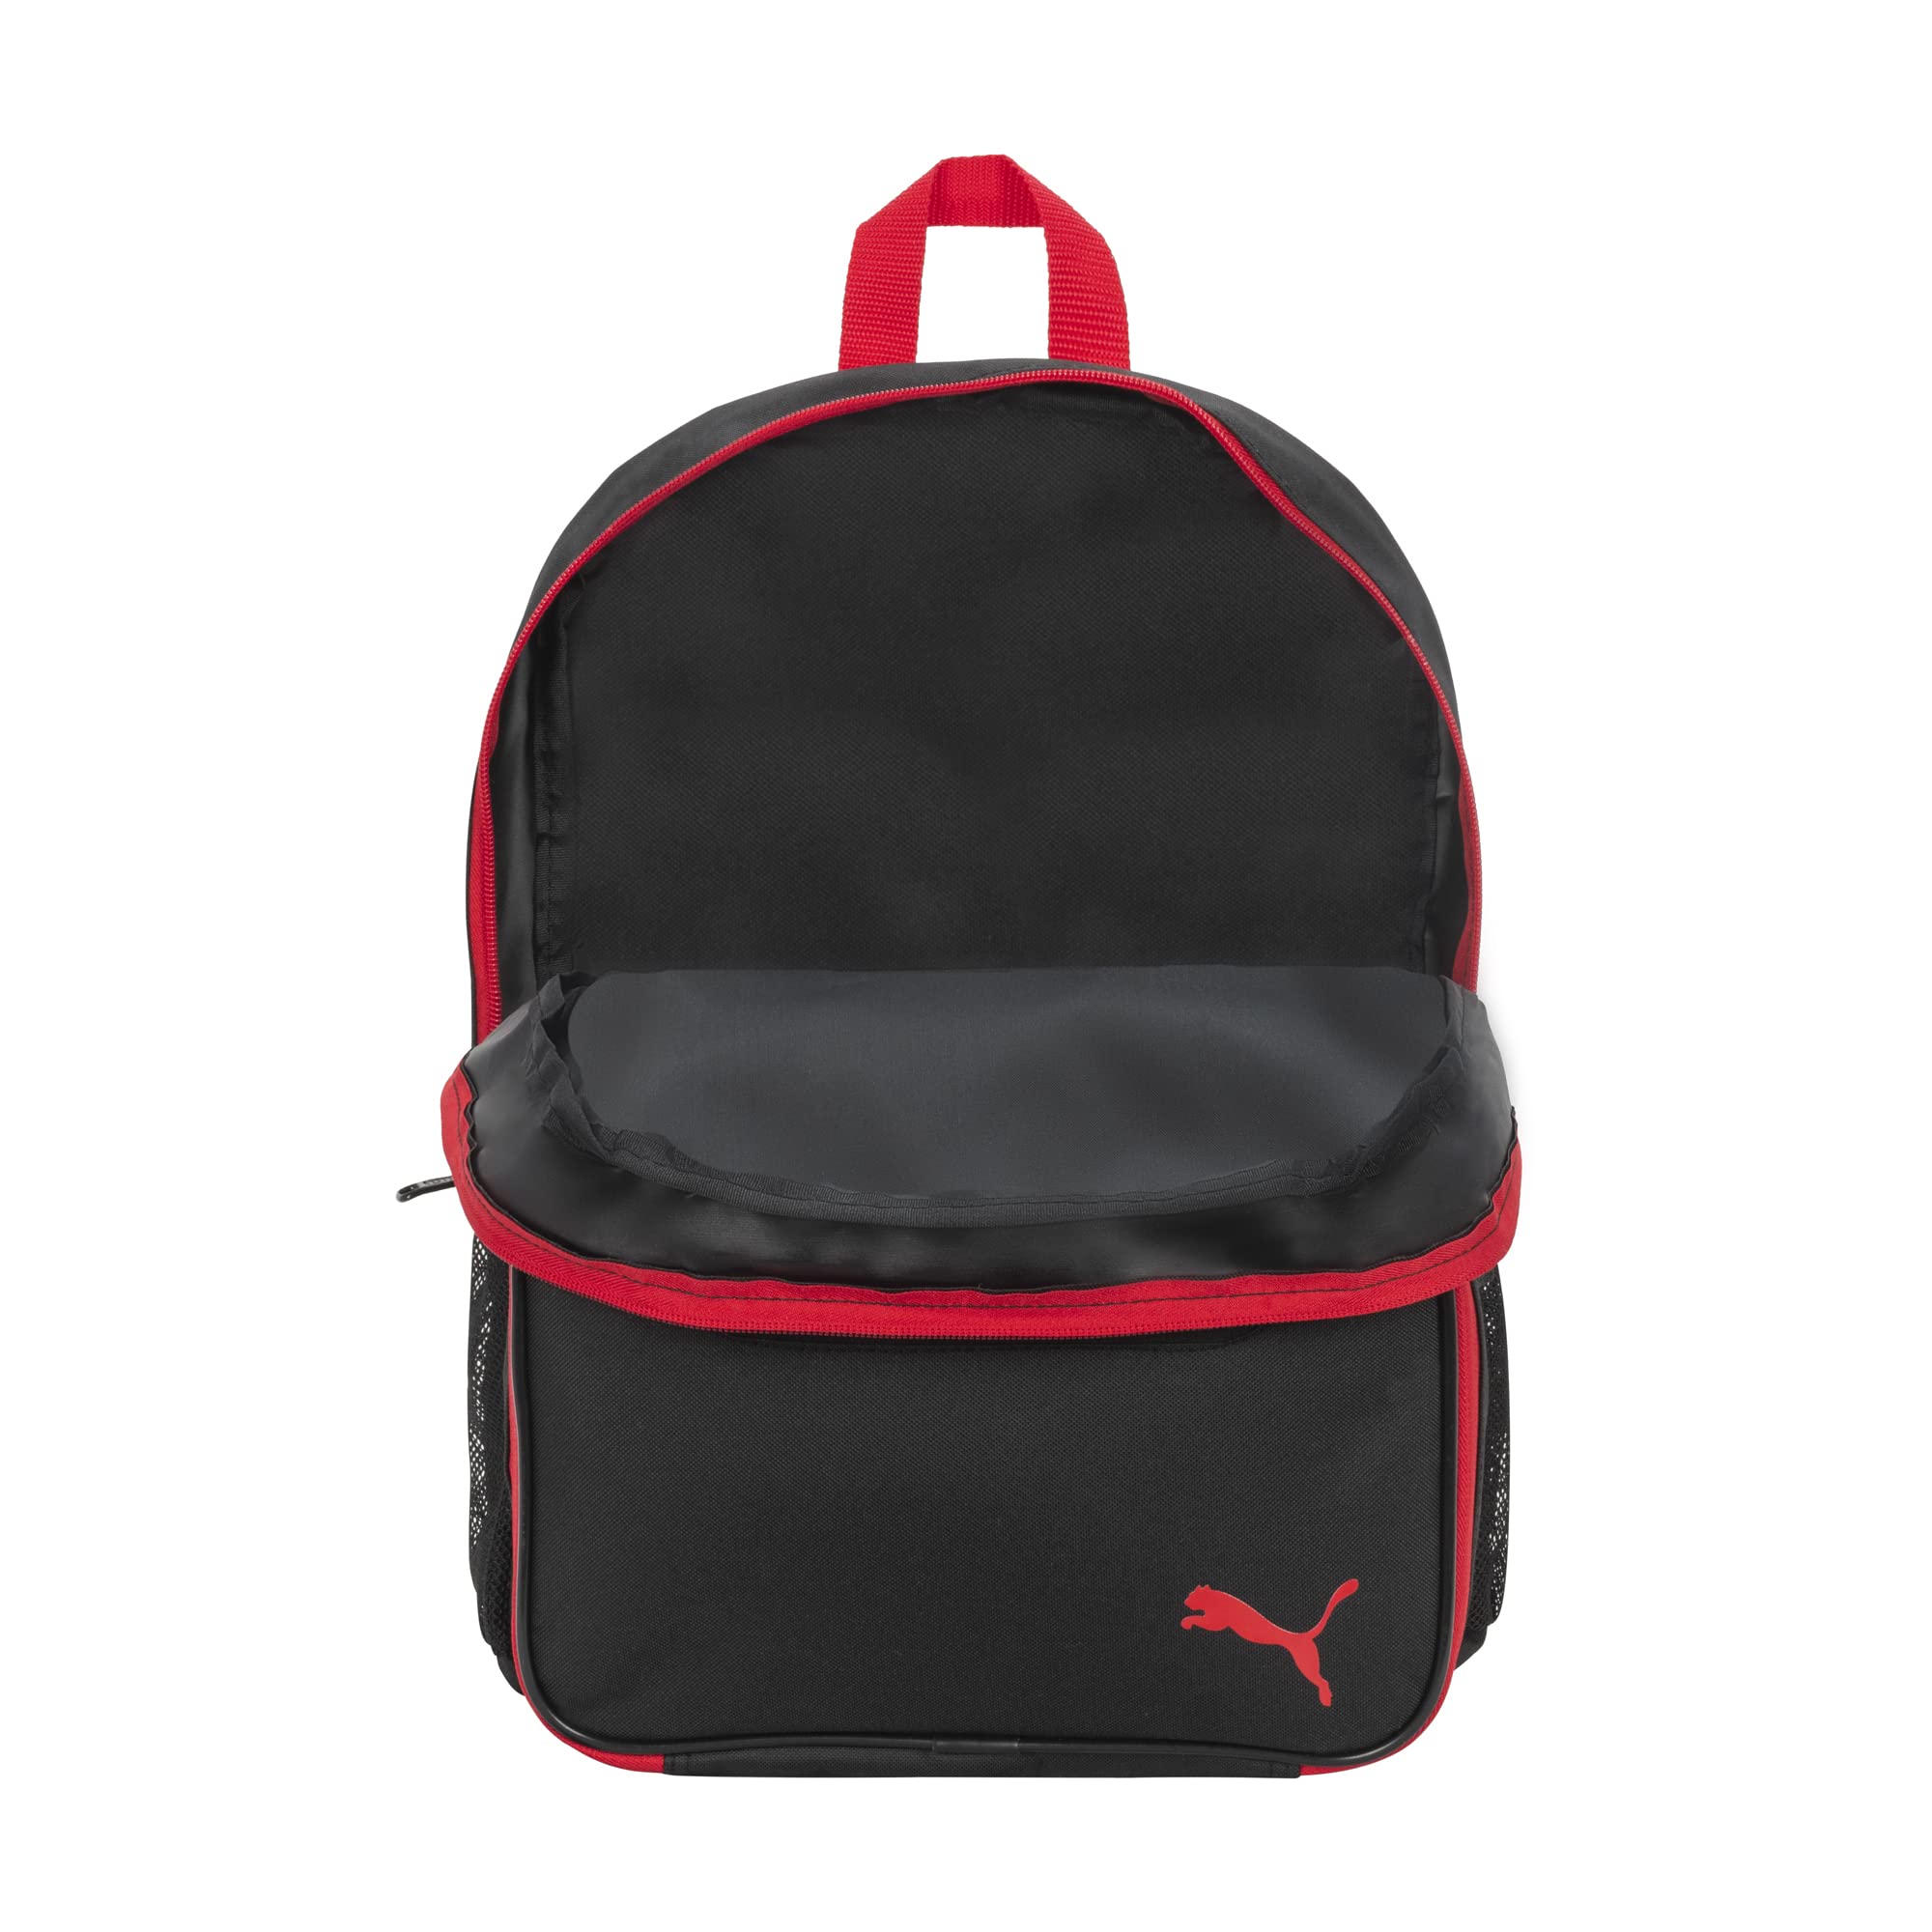 PUMA KIDS' EVERCAT BACKPACK & LUNCH KIT COMBO, Black/Red, Youth Size